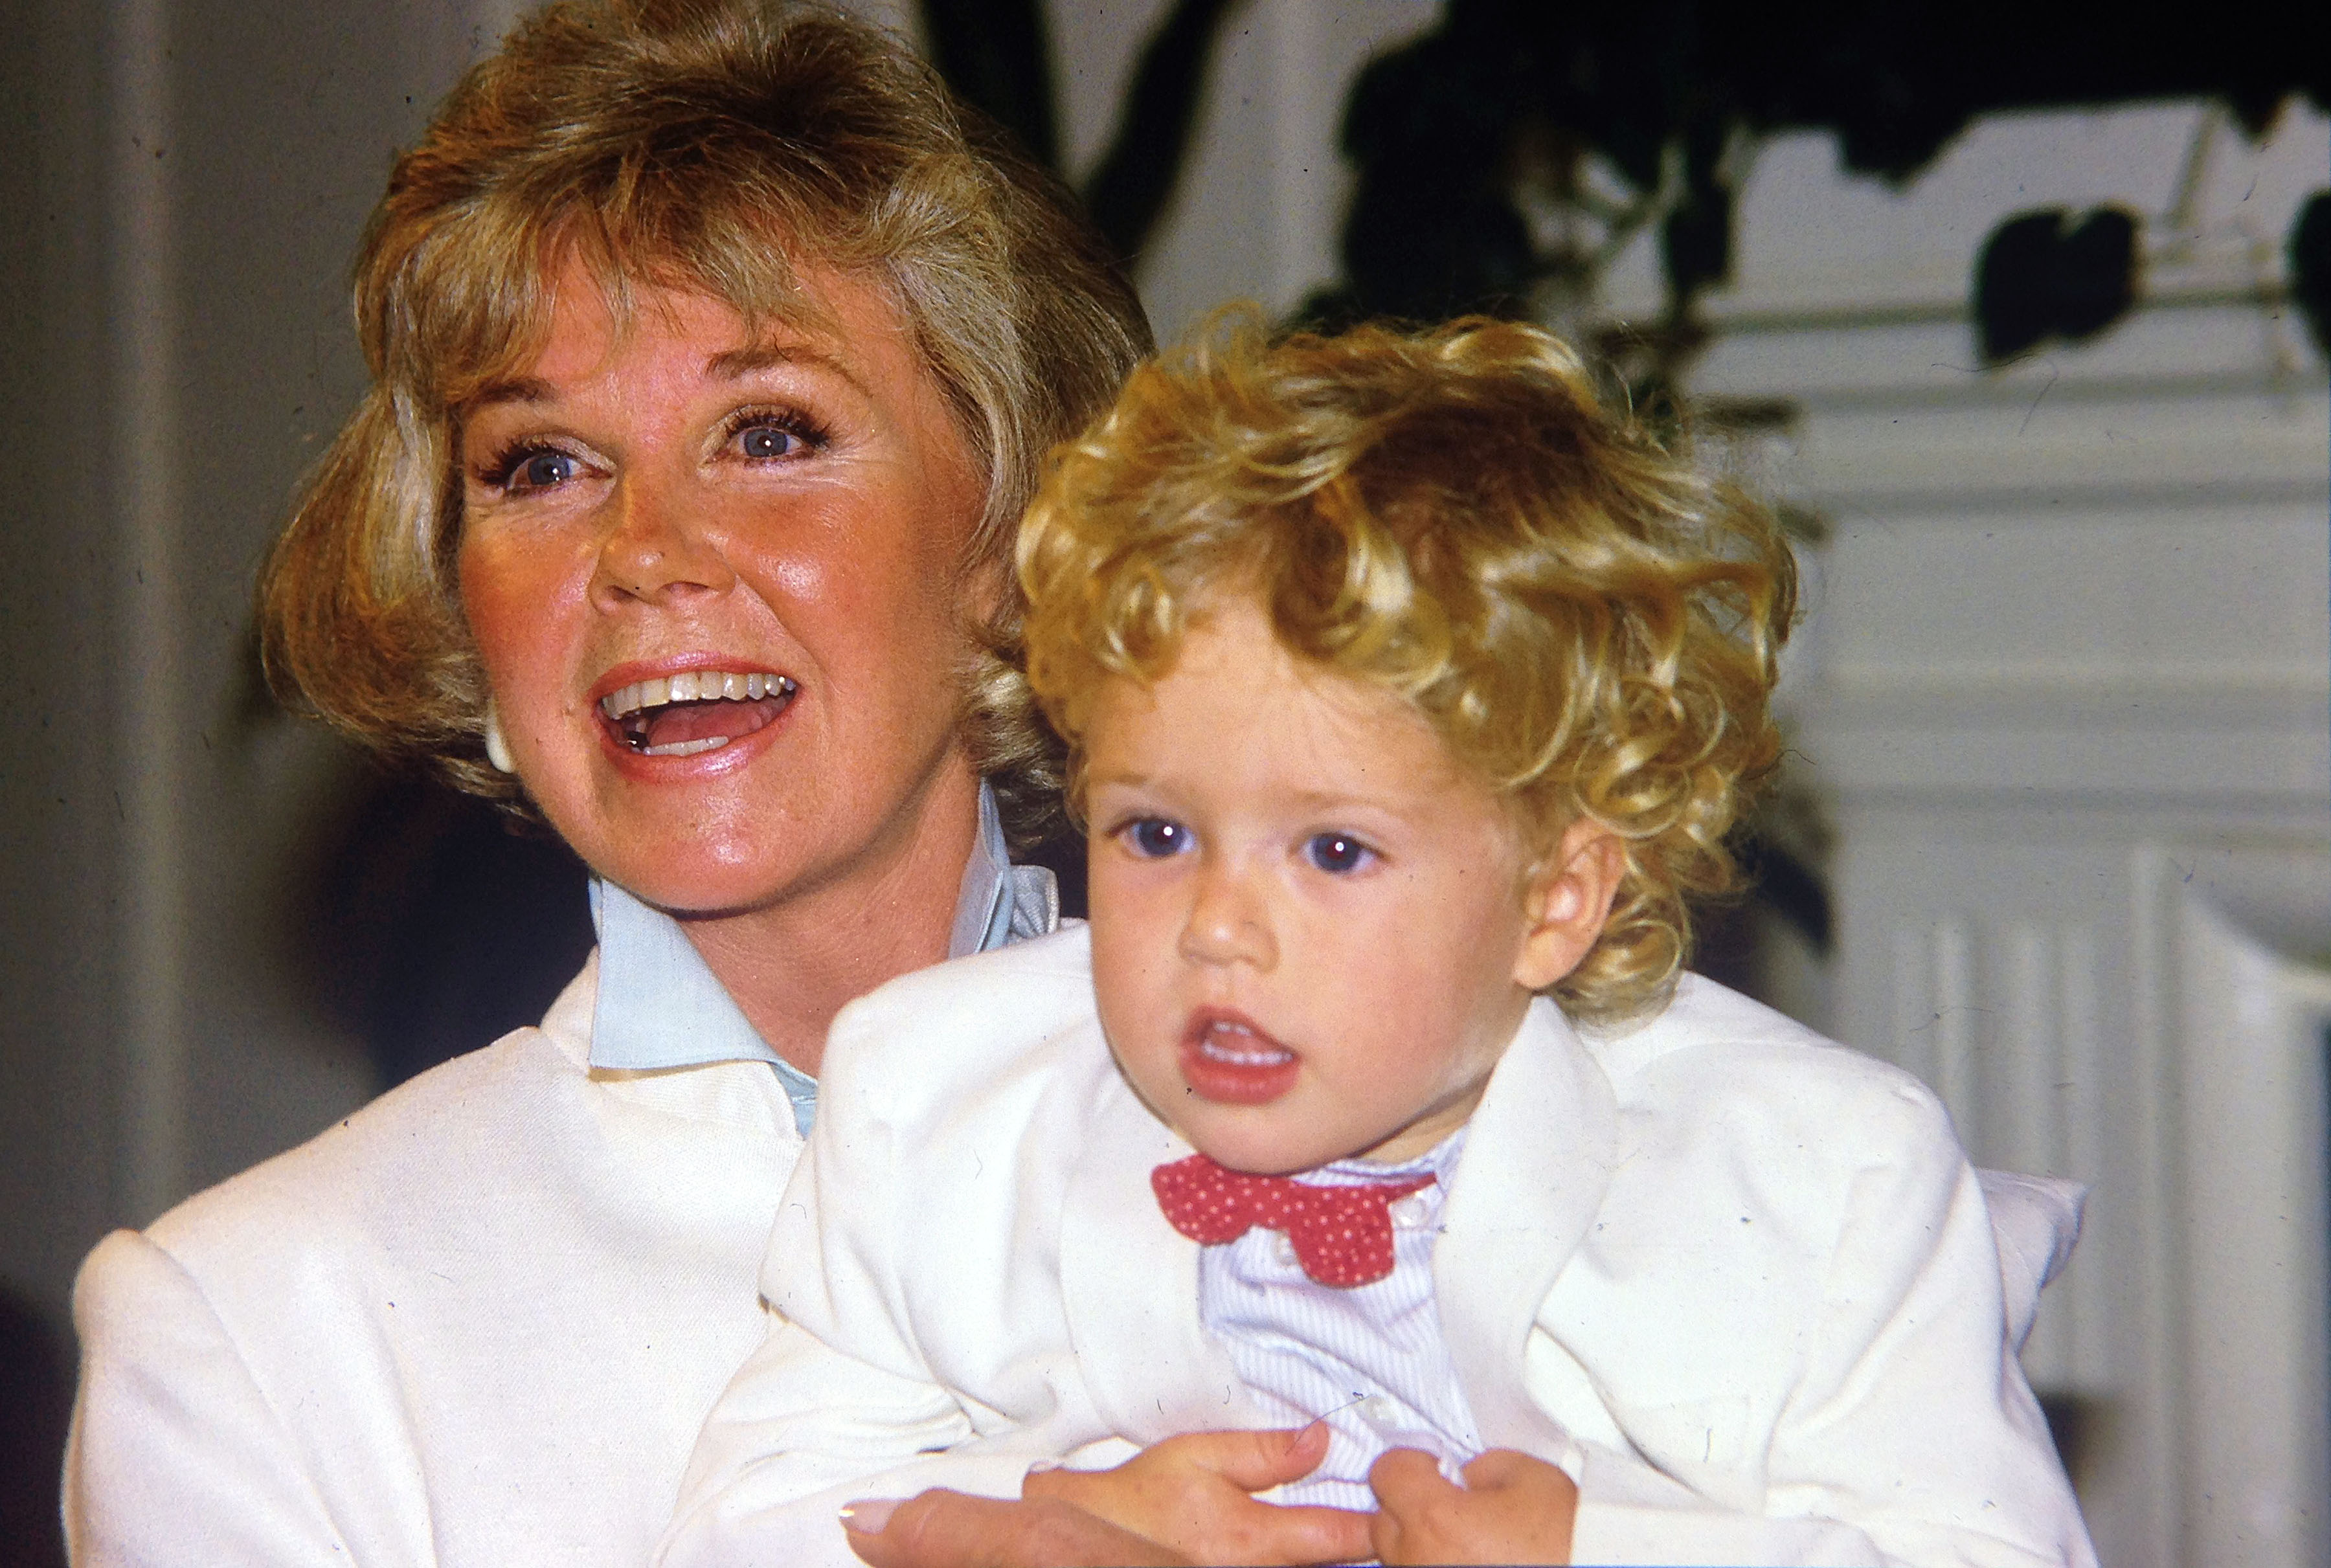 Doris Day and Ryan Melcher at a press conference in Carmel, California on July 16, 1985 | Source: Getty Images